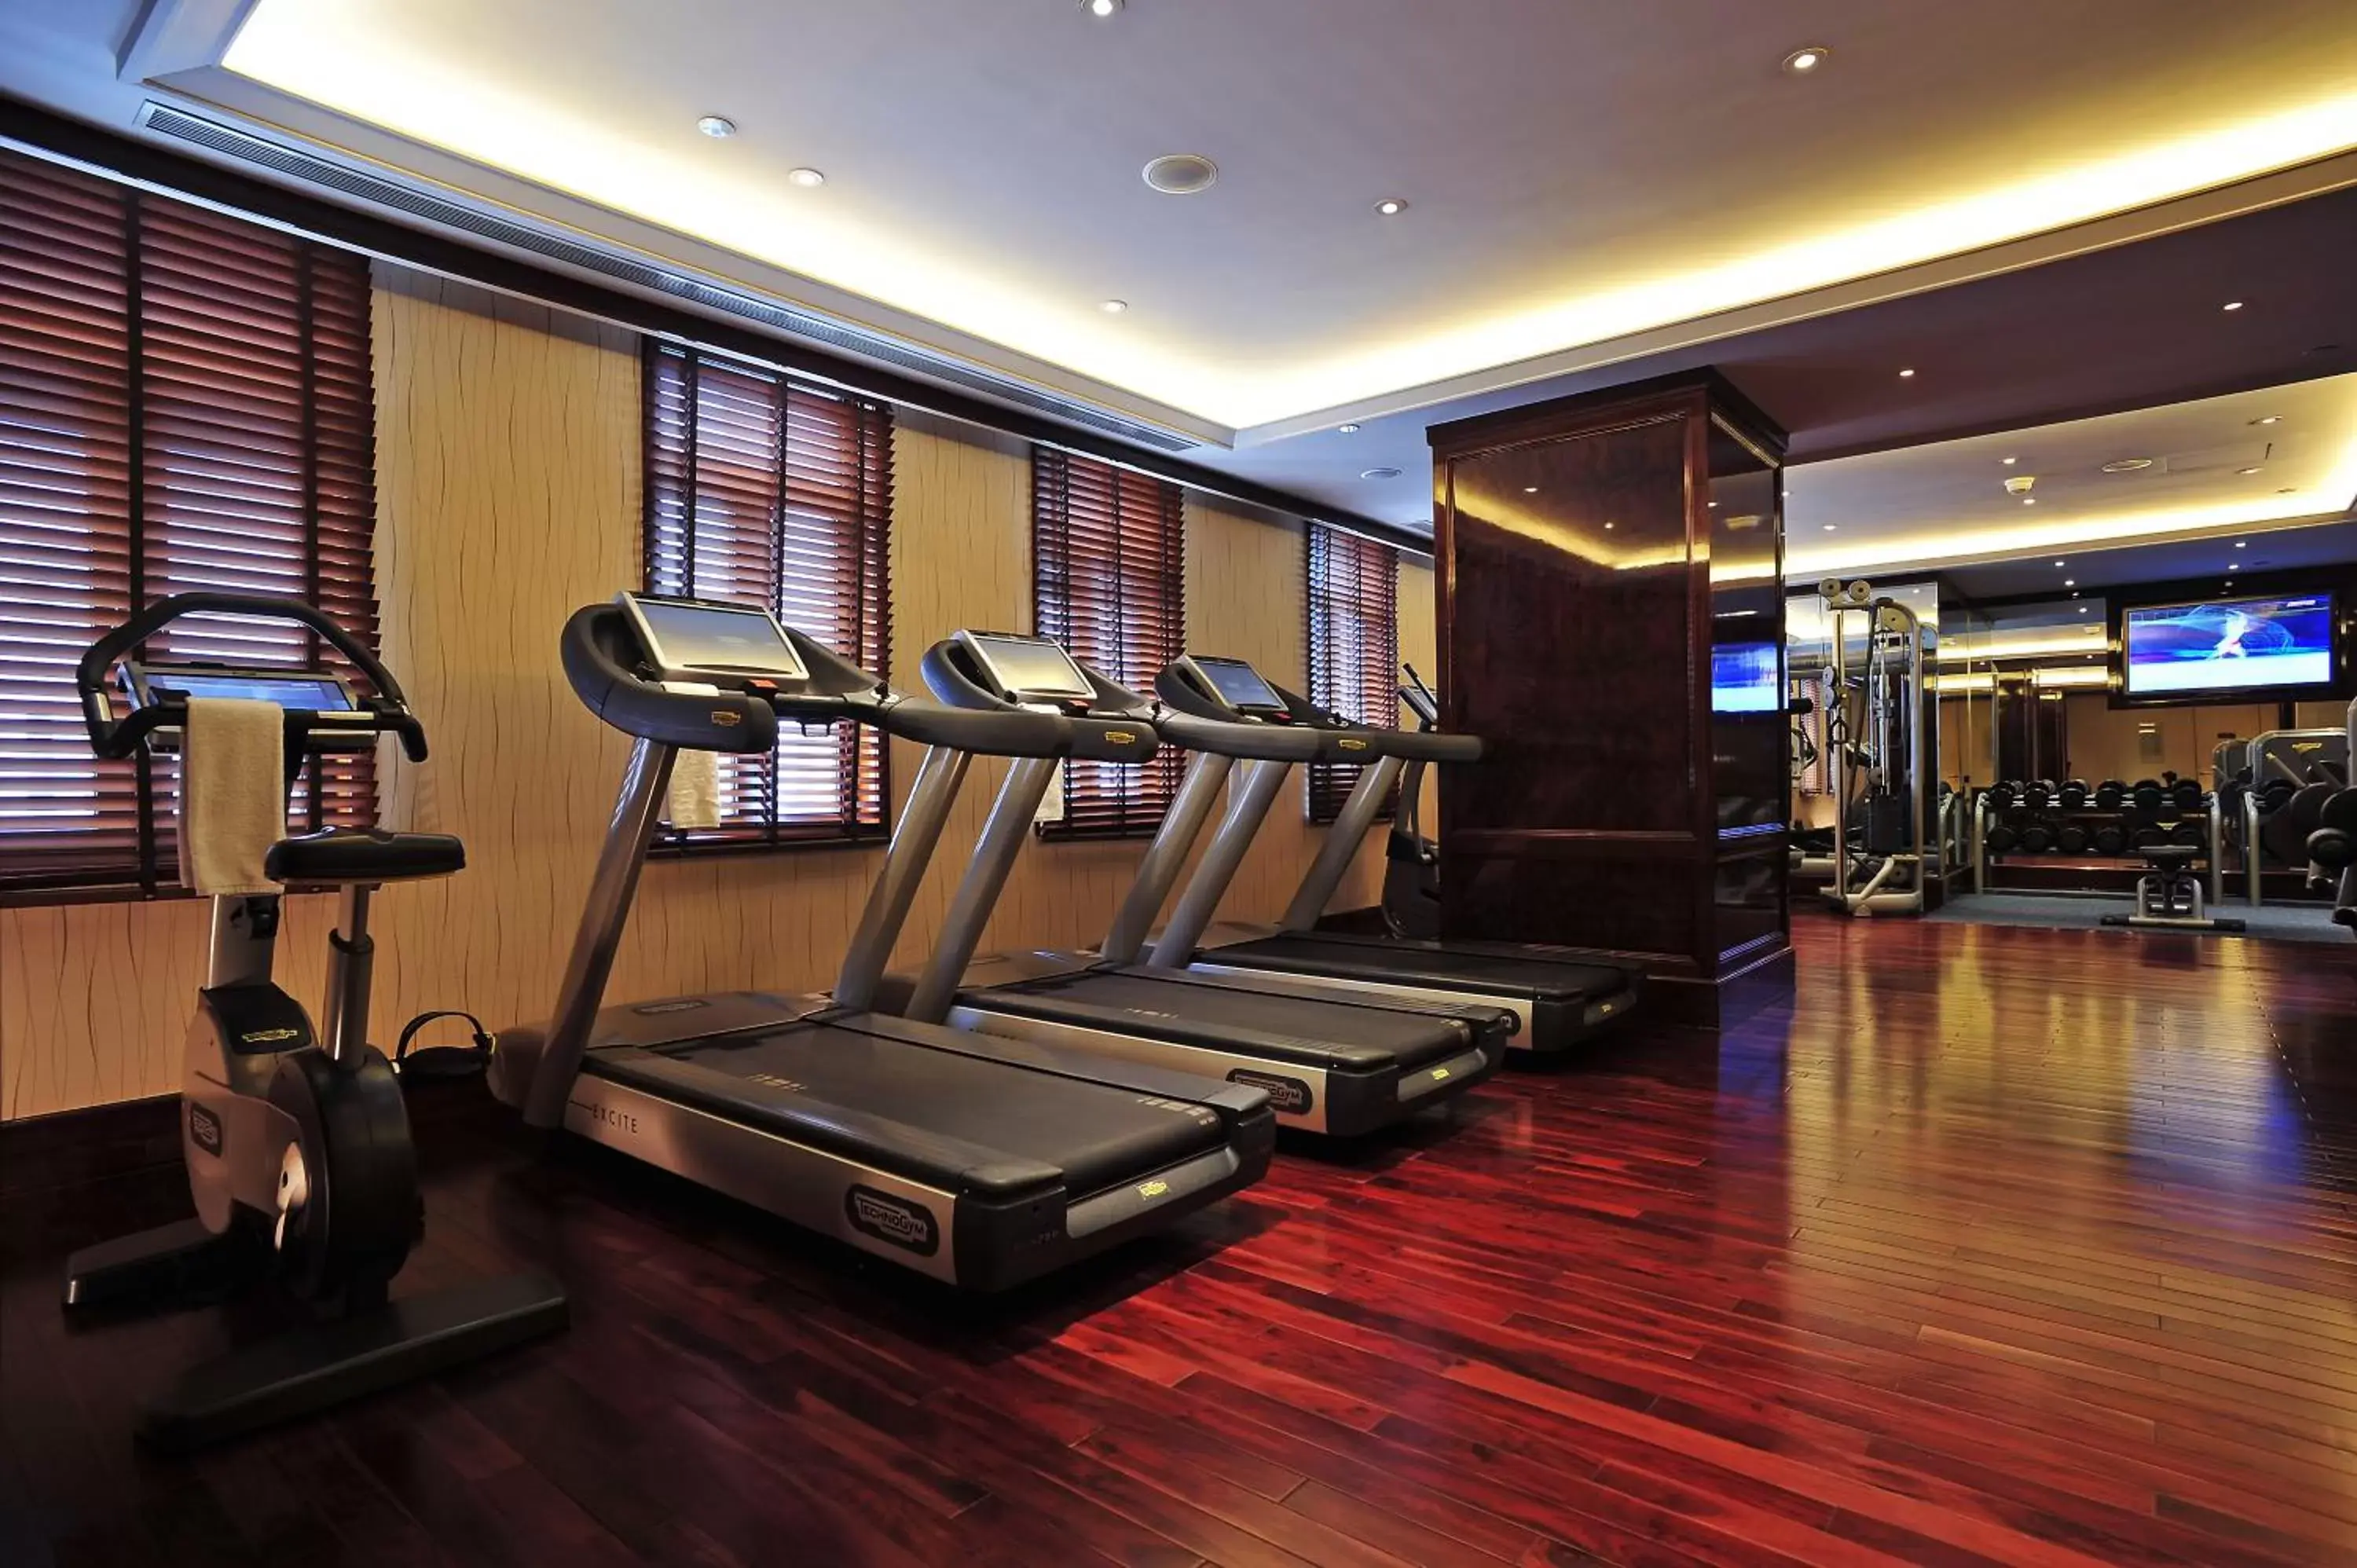 Fitness centre/facilities, Fitness Center/Facilities in Fairmont Peace Hotel On the Bund (Start your own story with the BUND)